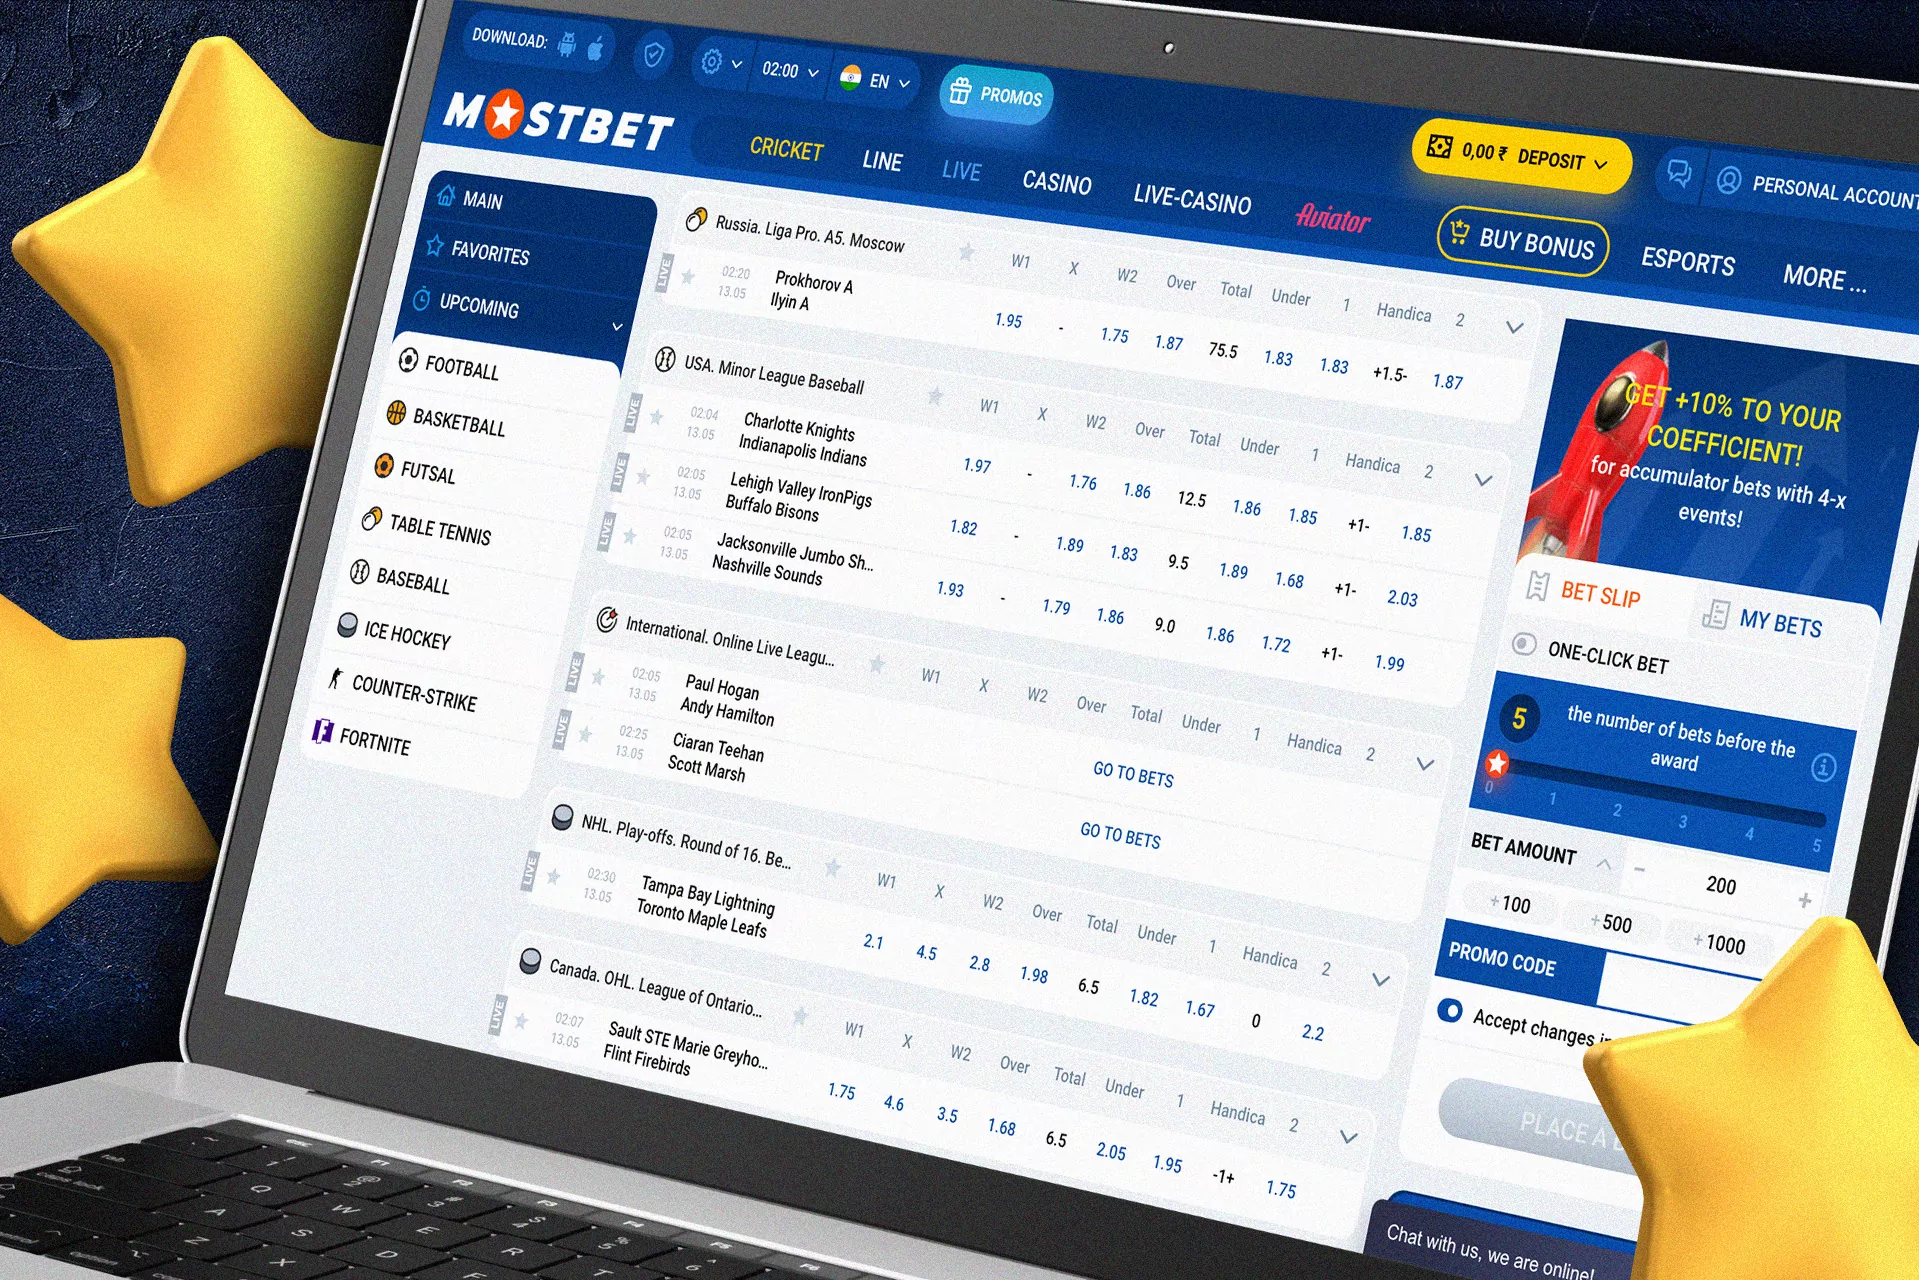 You can find live previews at Mostbet.